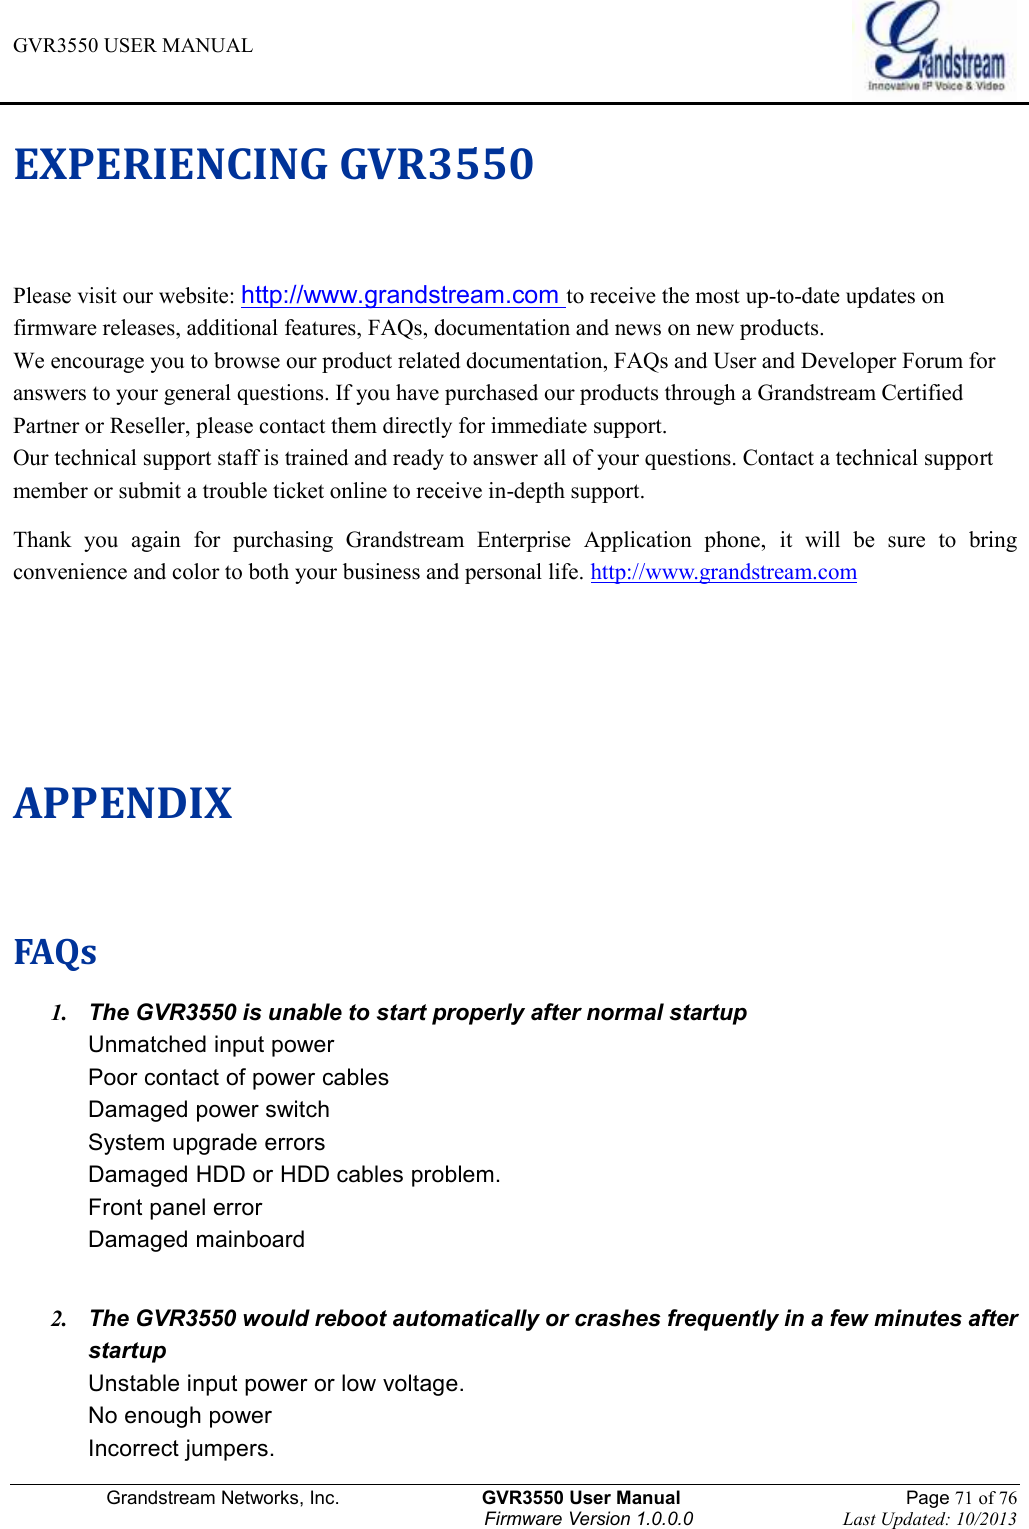 GVR3550 USER MANUAL   Grandstream Networks, Inc.                    GVR3550 User Manual                                                Page 71 of 76 Firmware Version 1.0.0.0                                Last Updated: 10/2013  EXPERIENCING GVR3550   Please visit our website: http://www.grandstream.com to receive the most up-to-date updates on firmware releases, additional features, FAQs, documentation and news on new products.   We encourage you to browse our product related documentation, FAQs and User and Developer Forum for answers to your general questions. If you have purchased our products through a Grandstream Certified Partner or Reseller, please contact them directly for immediate support.   Our technical support staff is trained and ready to answer all of your questions. Contact a technical support member or submit a trouble ticket online to receive in-depth support.   Thank  you  again  for  purchasing  Grandstream  Enterprise  Application  phone,  it  will  be  sure  to  bring convenience and color to both your business and personal life. http://www.grandstream.com   APPENDIX FAQs 1. The GVR3550 is unable to start properly after normal startup Unmatched input power Poor contact of power cables   Damaged power switch System upgrade errors Damaged HDD or HDD cables problem. Front panel error Damaged mainboard   2. The GVR3550 would reboot automatically or crashes frequently in a few minutes after startup Unstable input power or low voltage. No enough power Incorrect jumpers. 